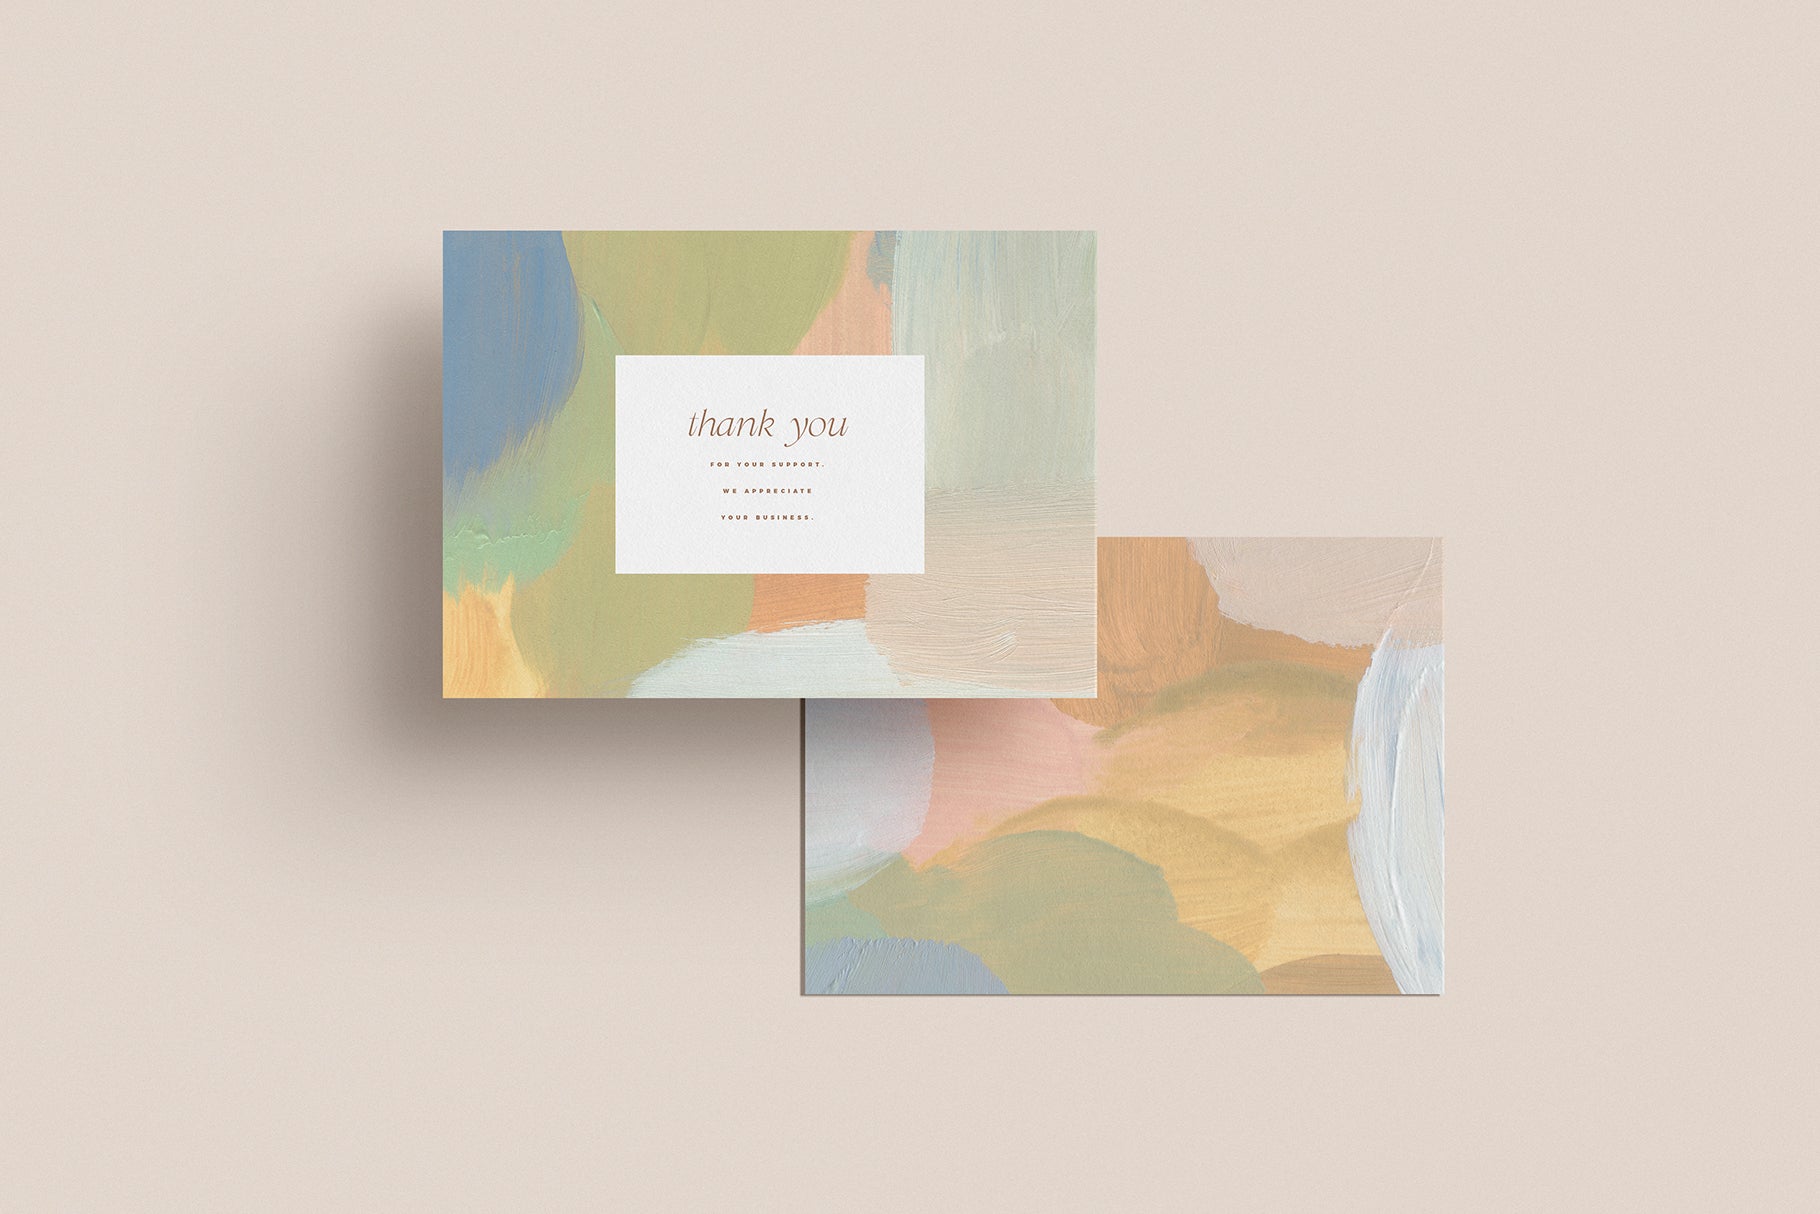 thank you card design with abstract painted background